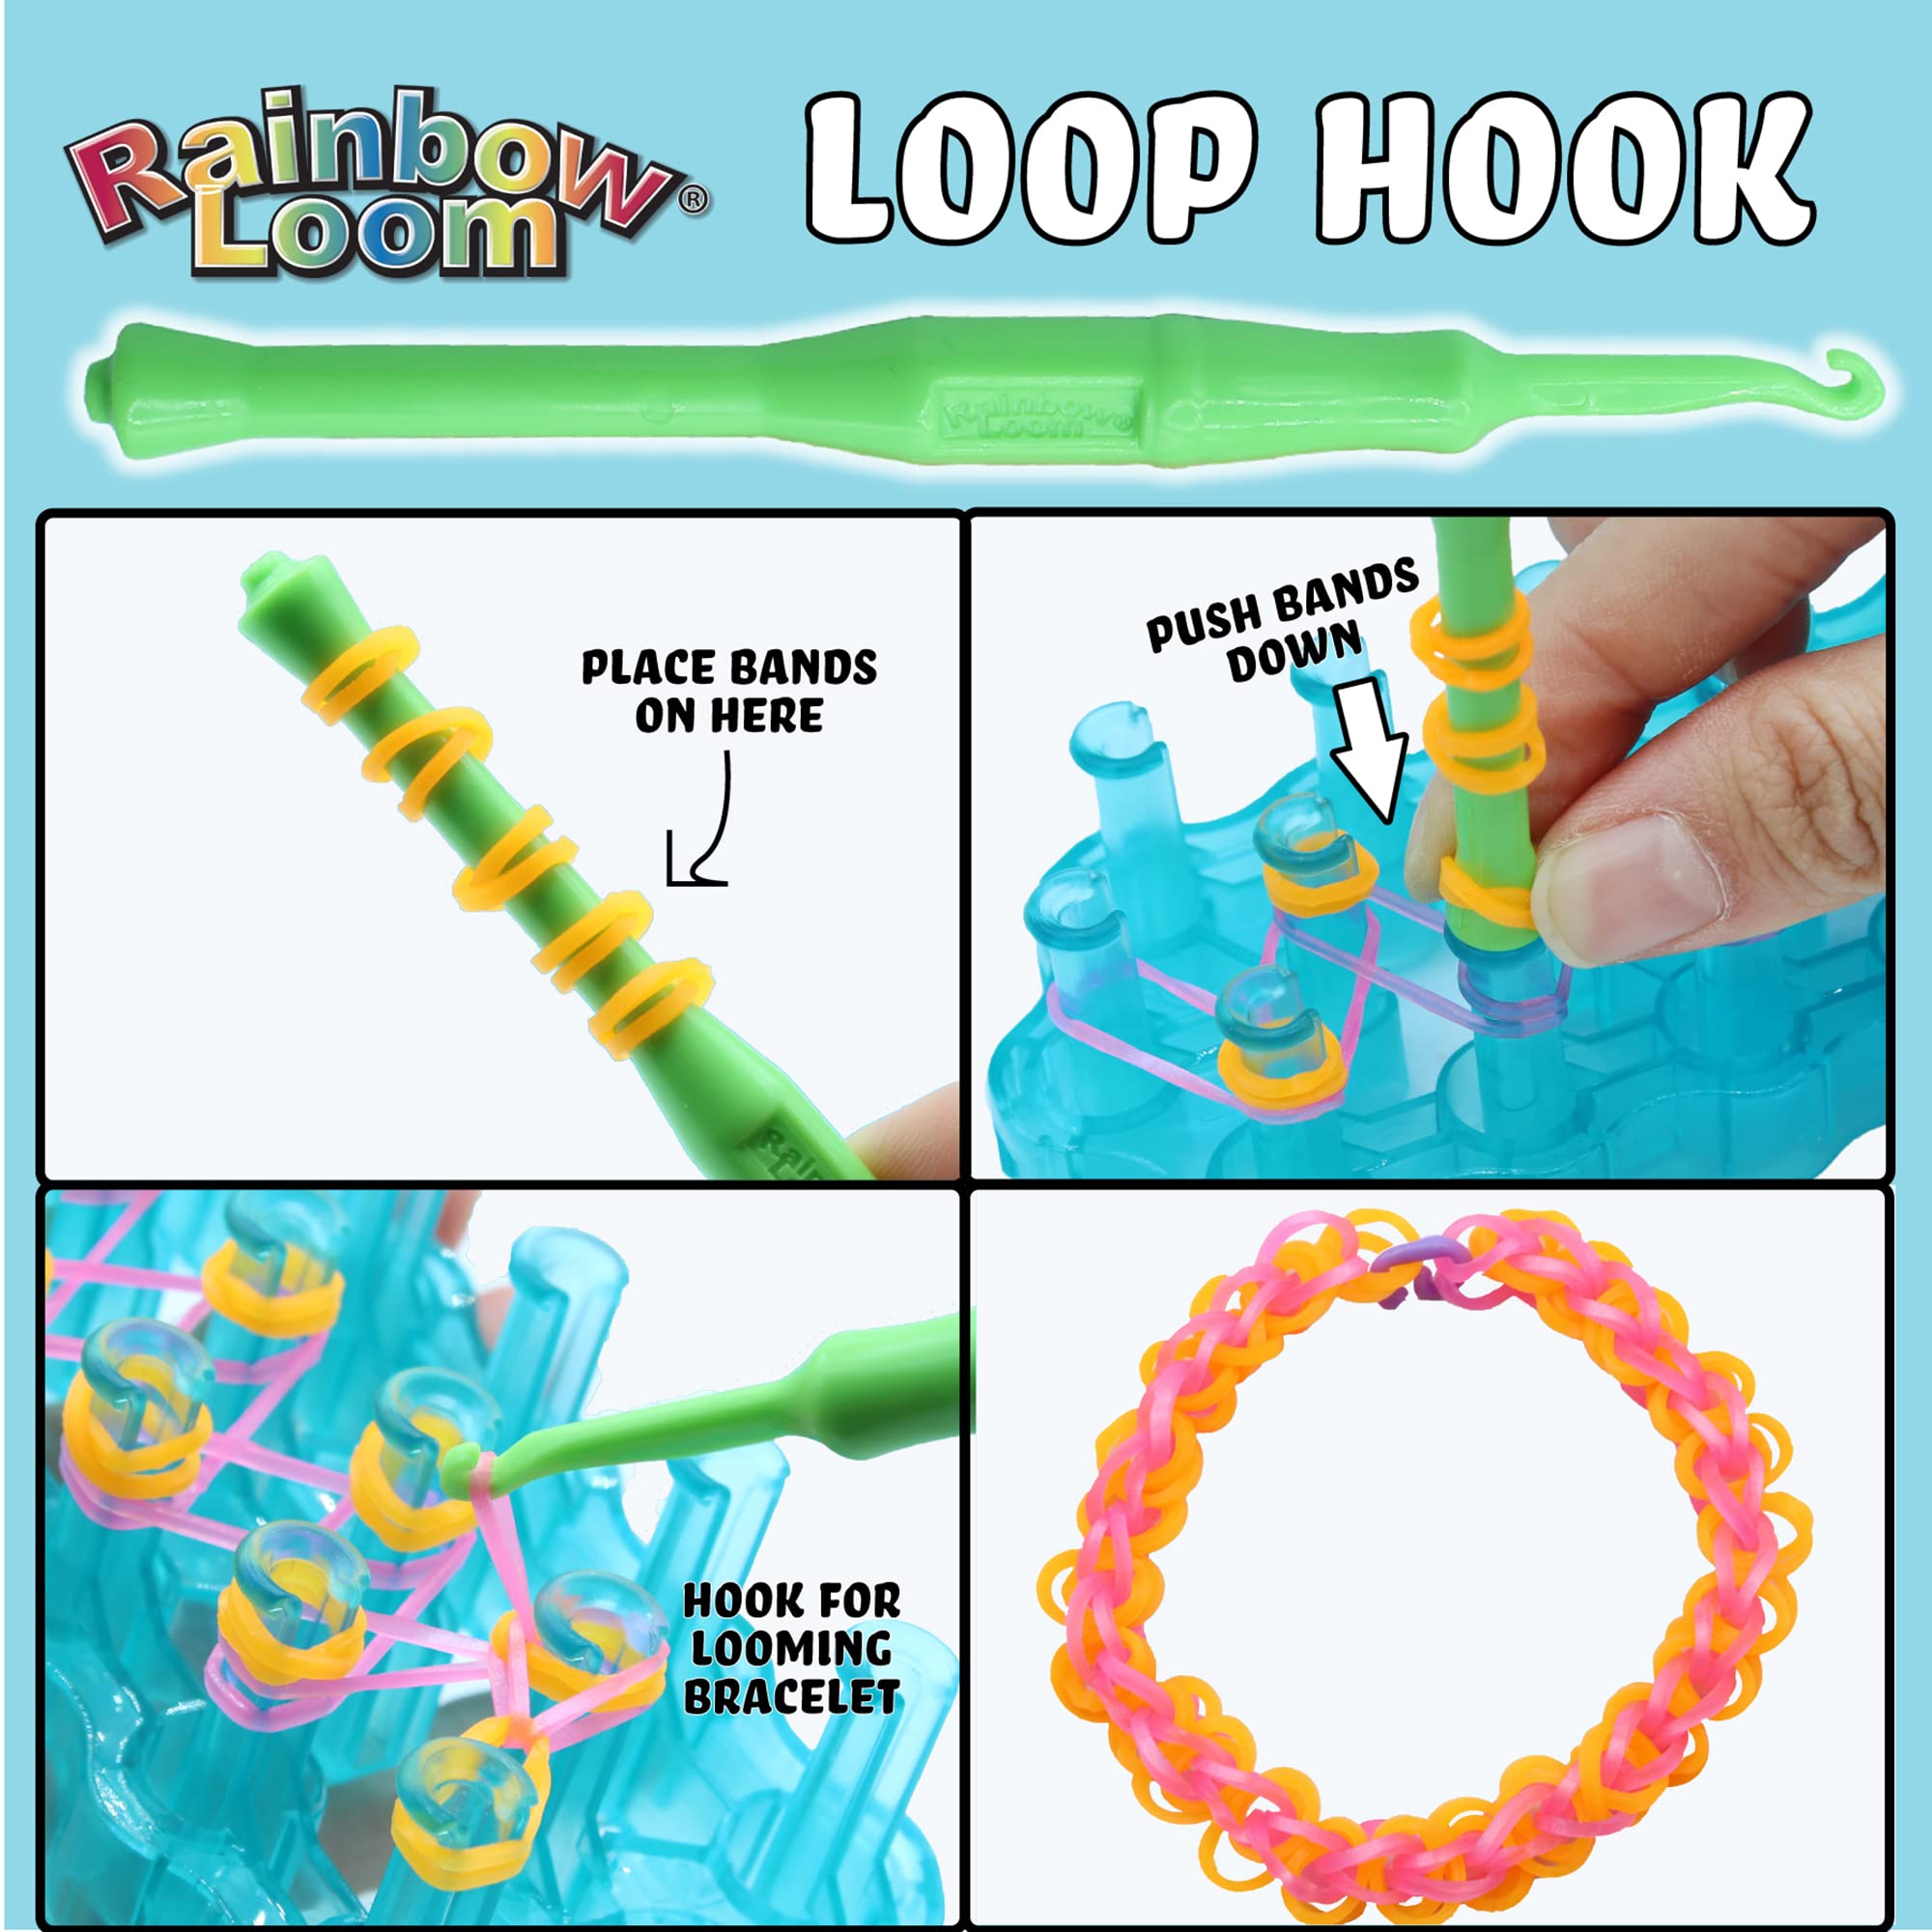 Rainbow Loom® Loomi-Pals Glow in The Dark Mega Combo Set Features 60 Cute Assorted LP Charms, The New RL2.0, Alpha & Pony Beads, 17 Colored Bands (2 Glow) All in a Carrying Case for Boys and Girls 7+